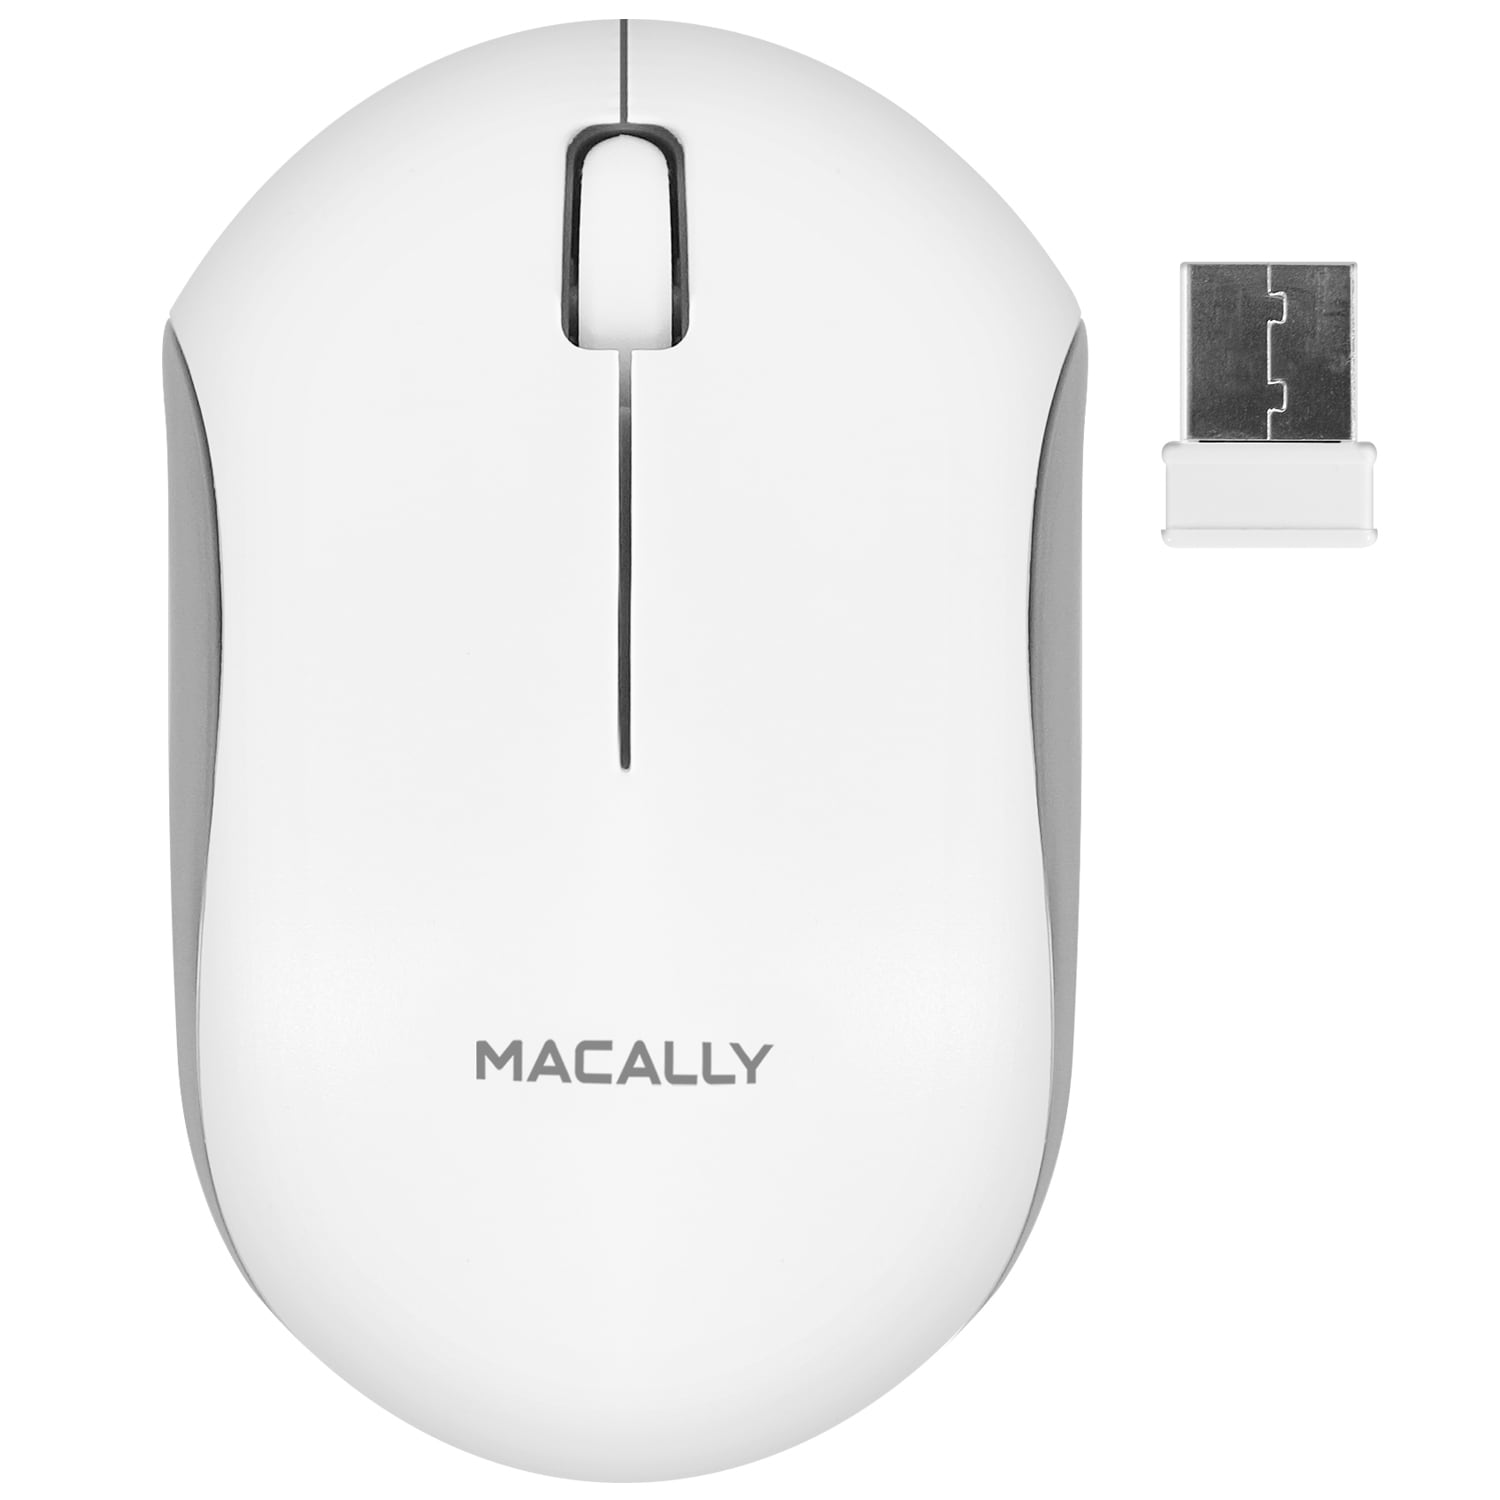 Macally Macally RFQMOUSE RF Wireless Computer Mouse with 3 Button, Scroll Wheel, Dongle Receiver, with Windows PC, Apple MacBook Pro/Air, iMac, Mini, Laptops (White) the Computers & Peripherals